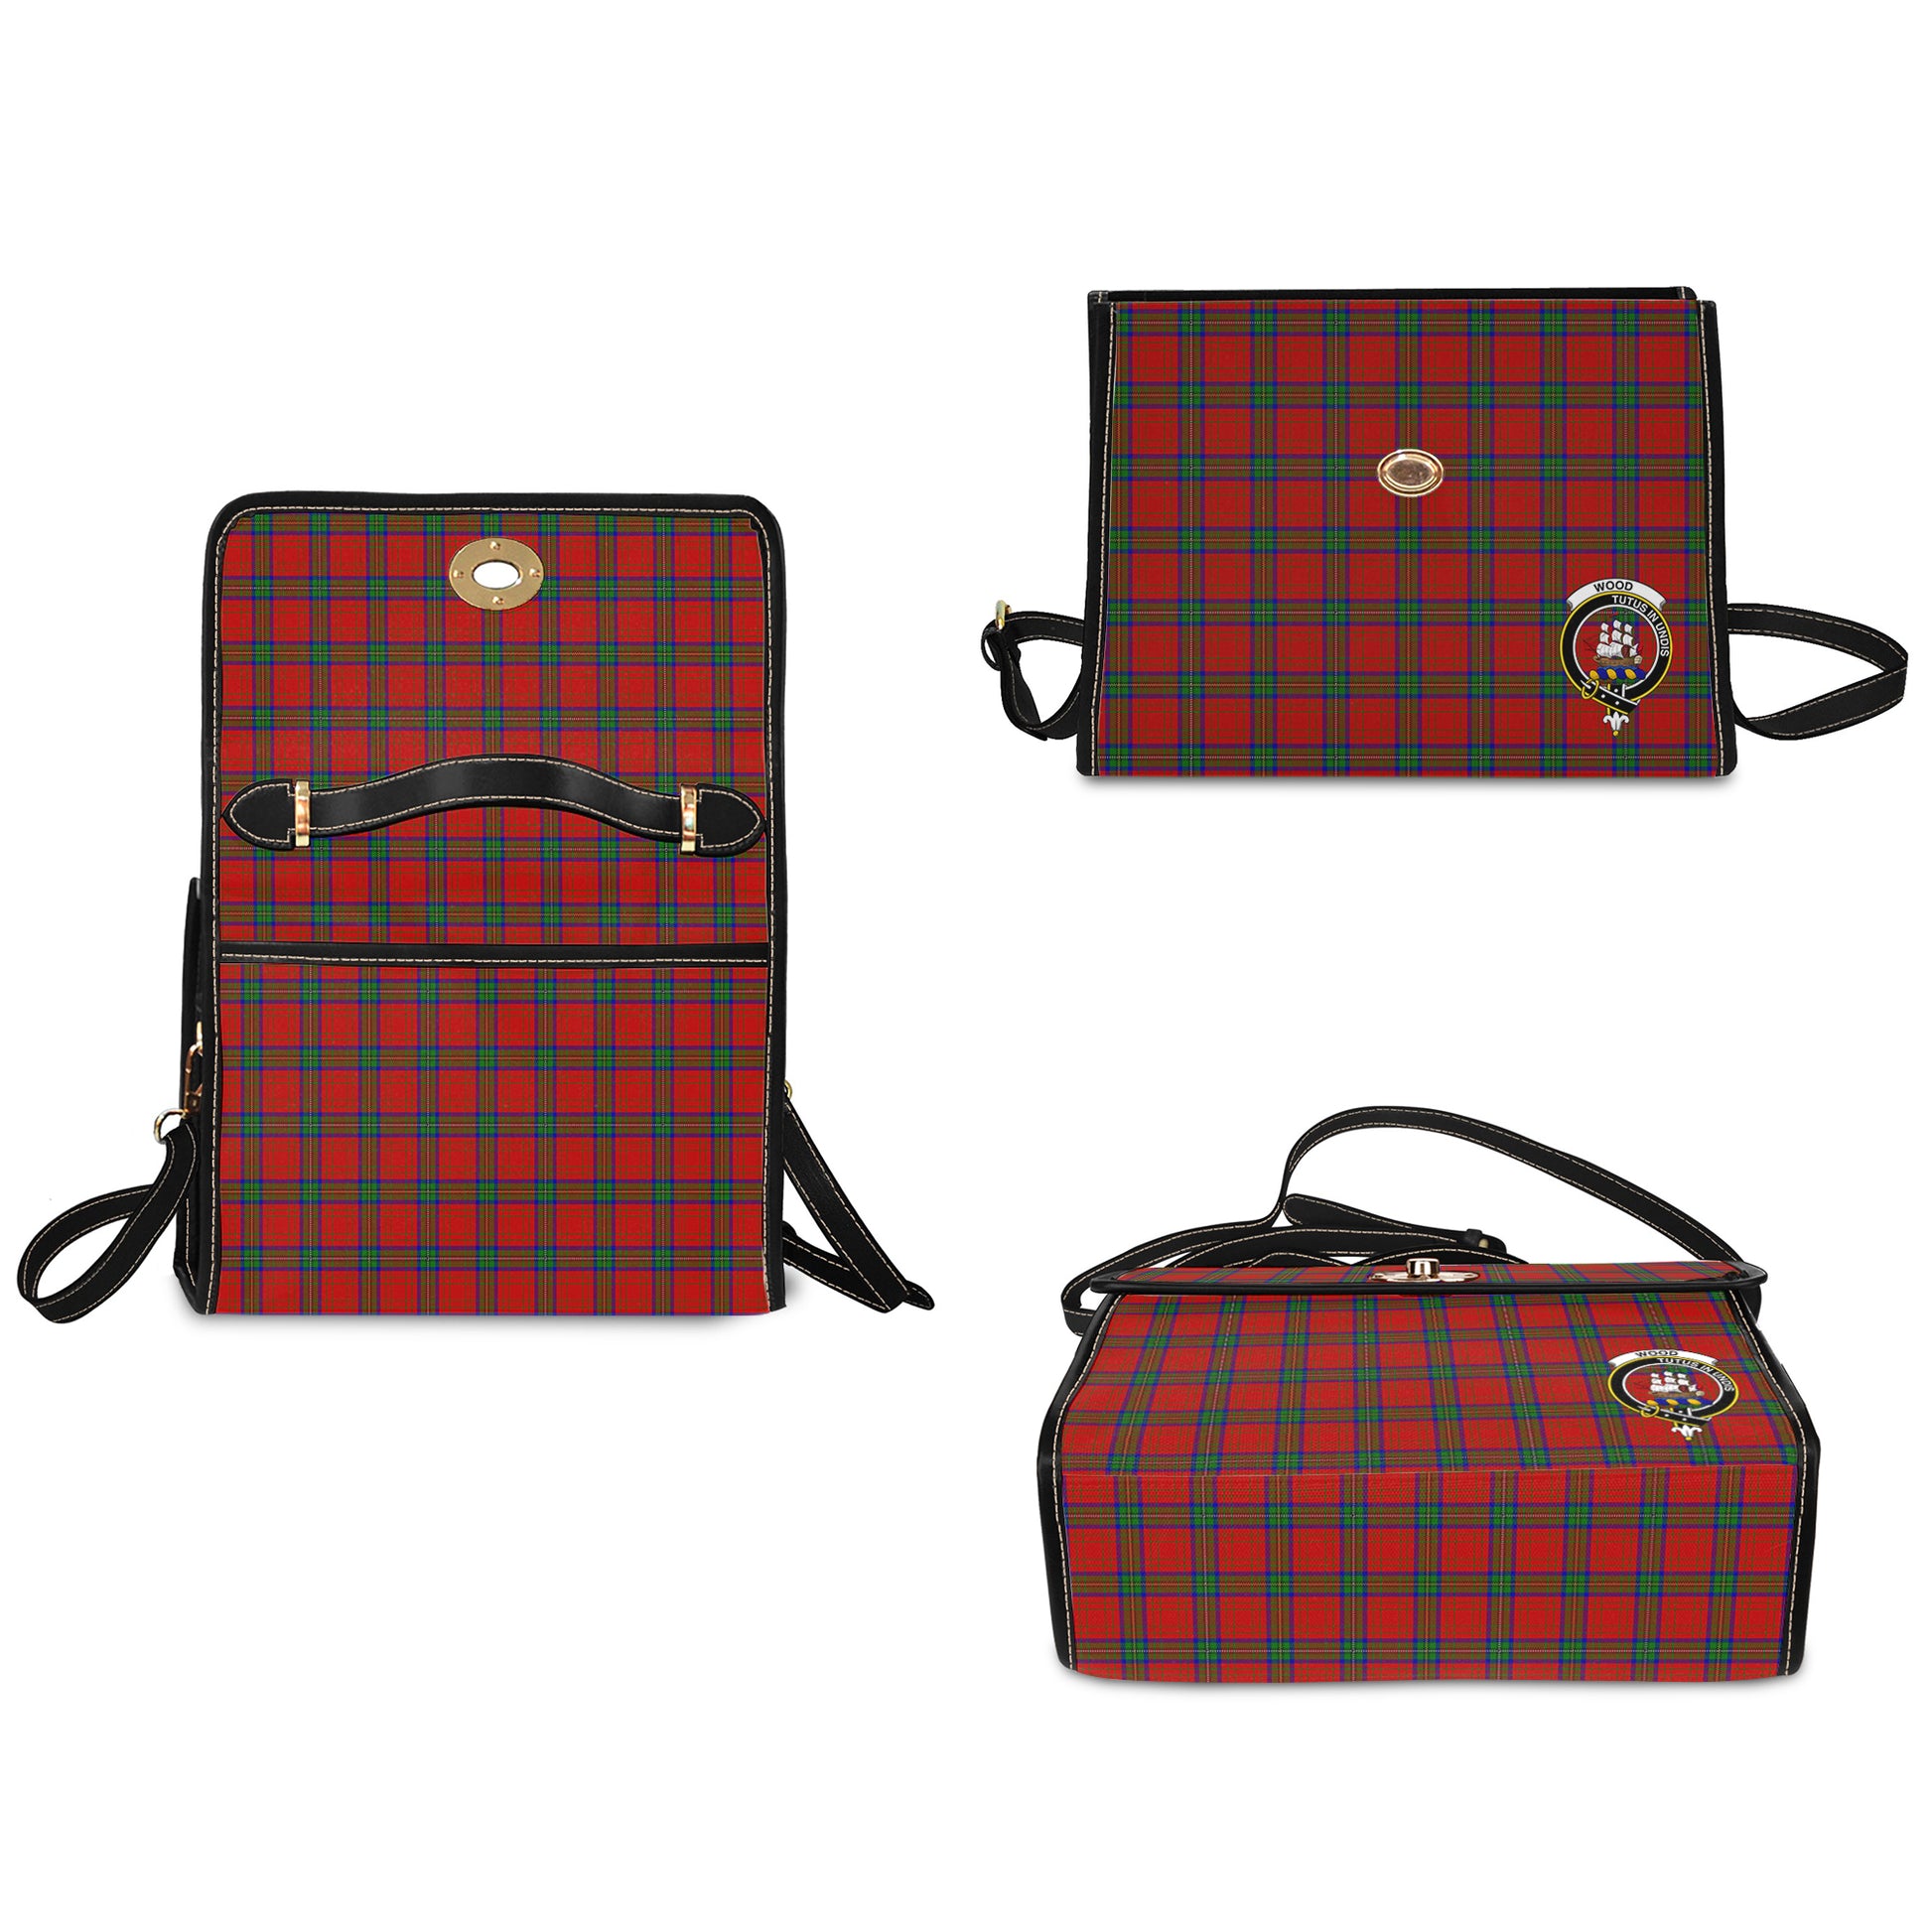 wood-dress-tartan-leather-strap-waterproof-canvas-bag-with-family-crest